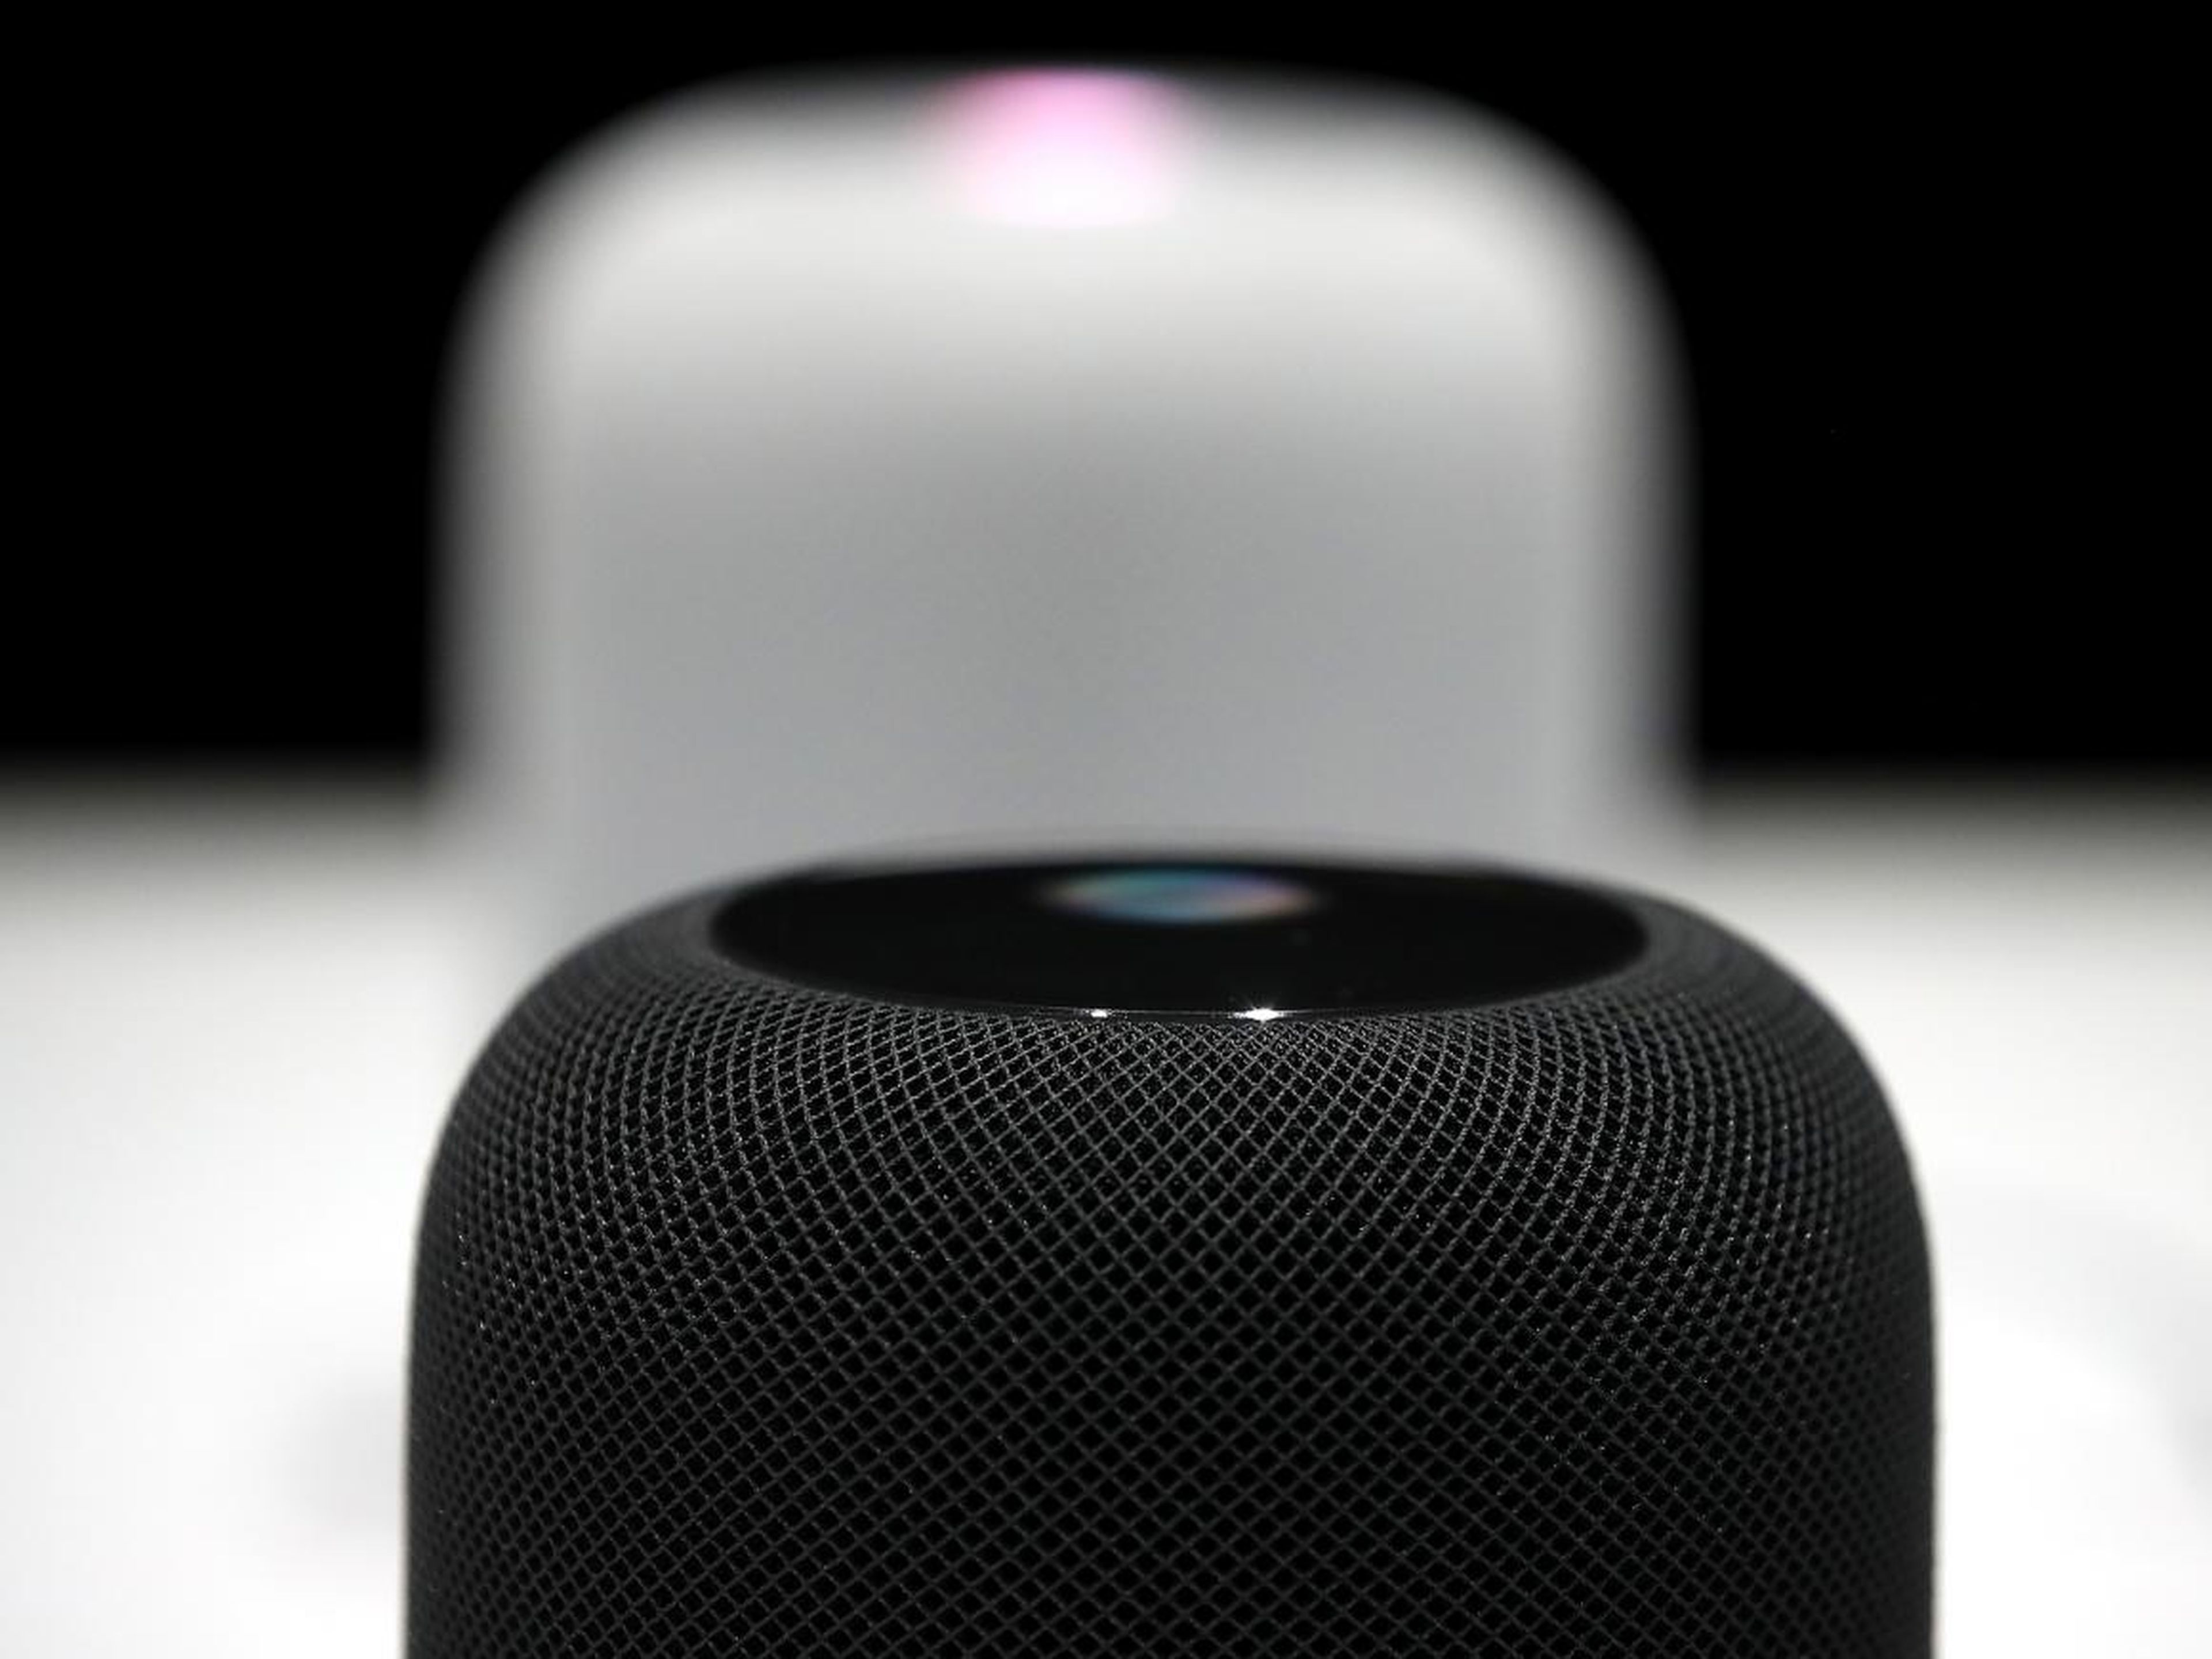 There's a strong case being made for why Apple should buy Sonos, and it highlights a major area where Apple is falling behind